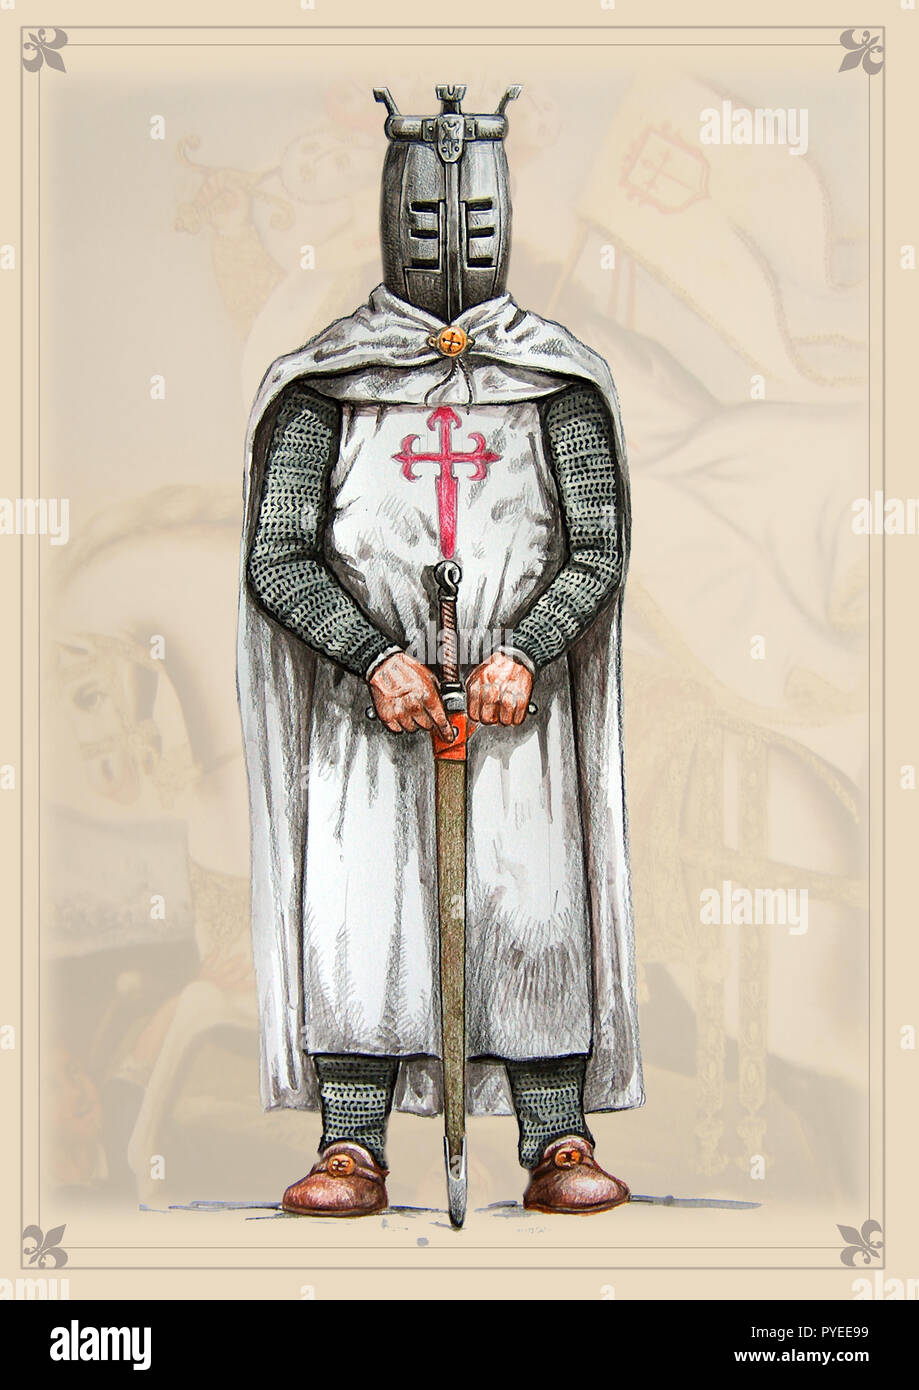 Knight of Order of Santiago, XIIIc. Medieval knight illustration. Crusader with sword. Stock Photo